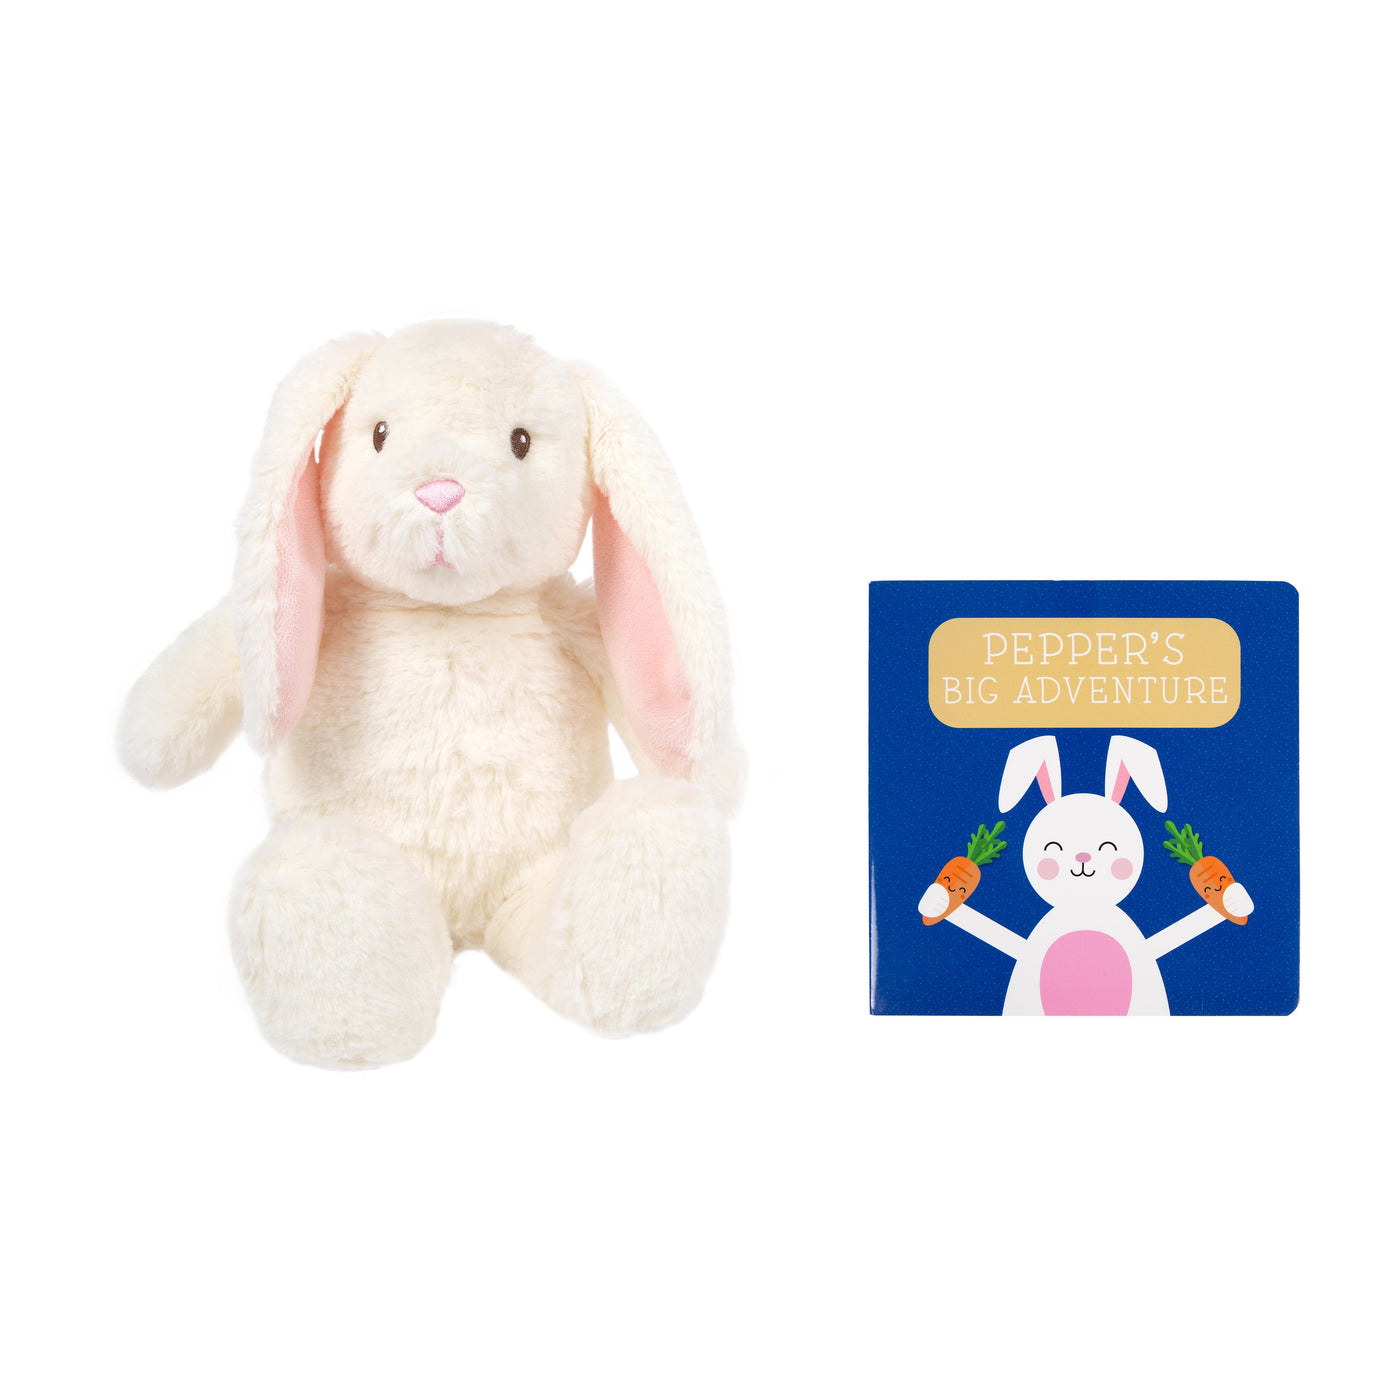 Pepper the Bunny Plush Toy with matching book